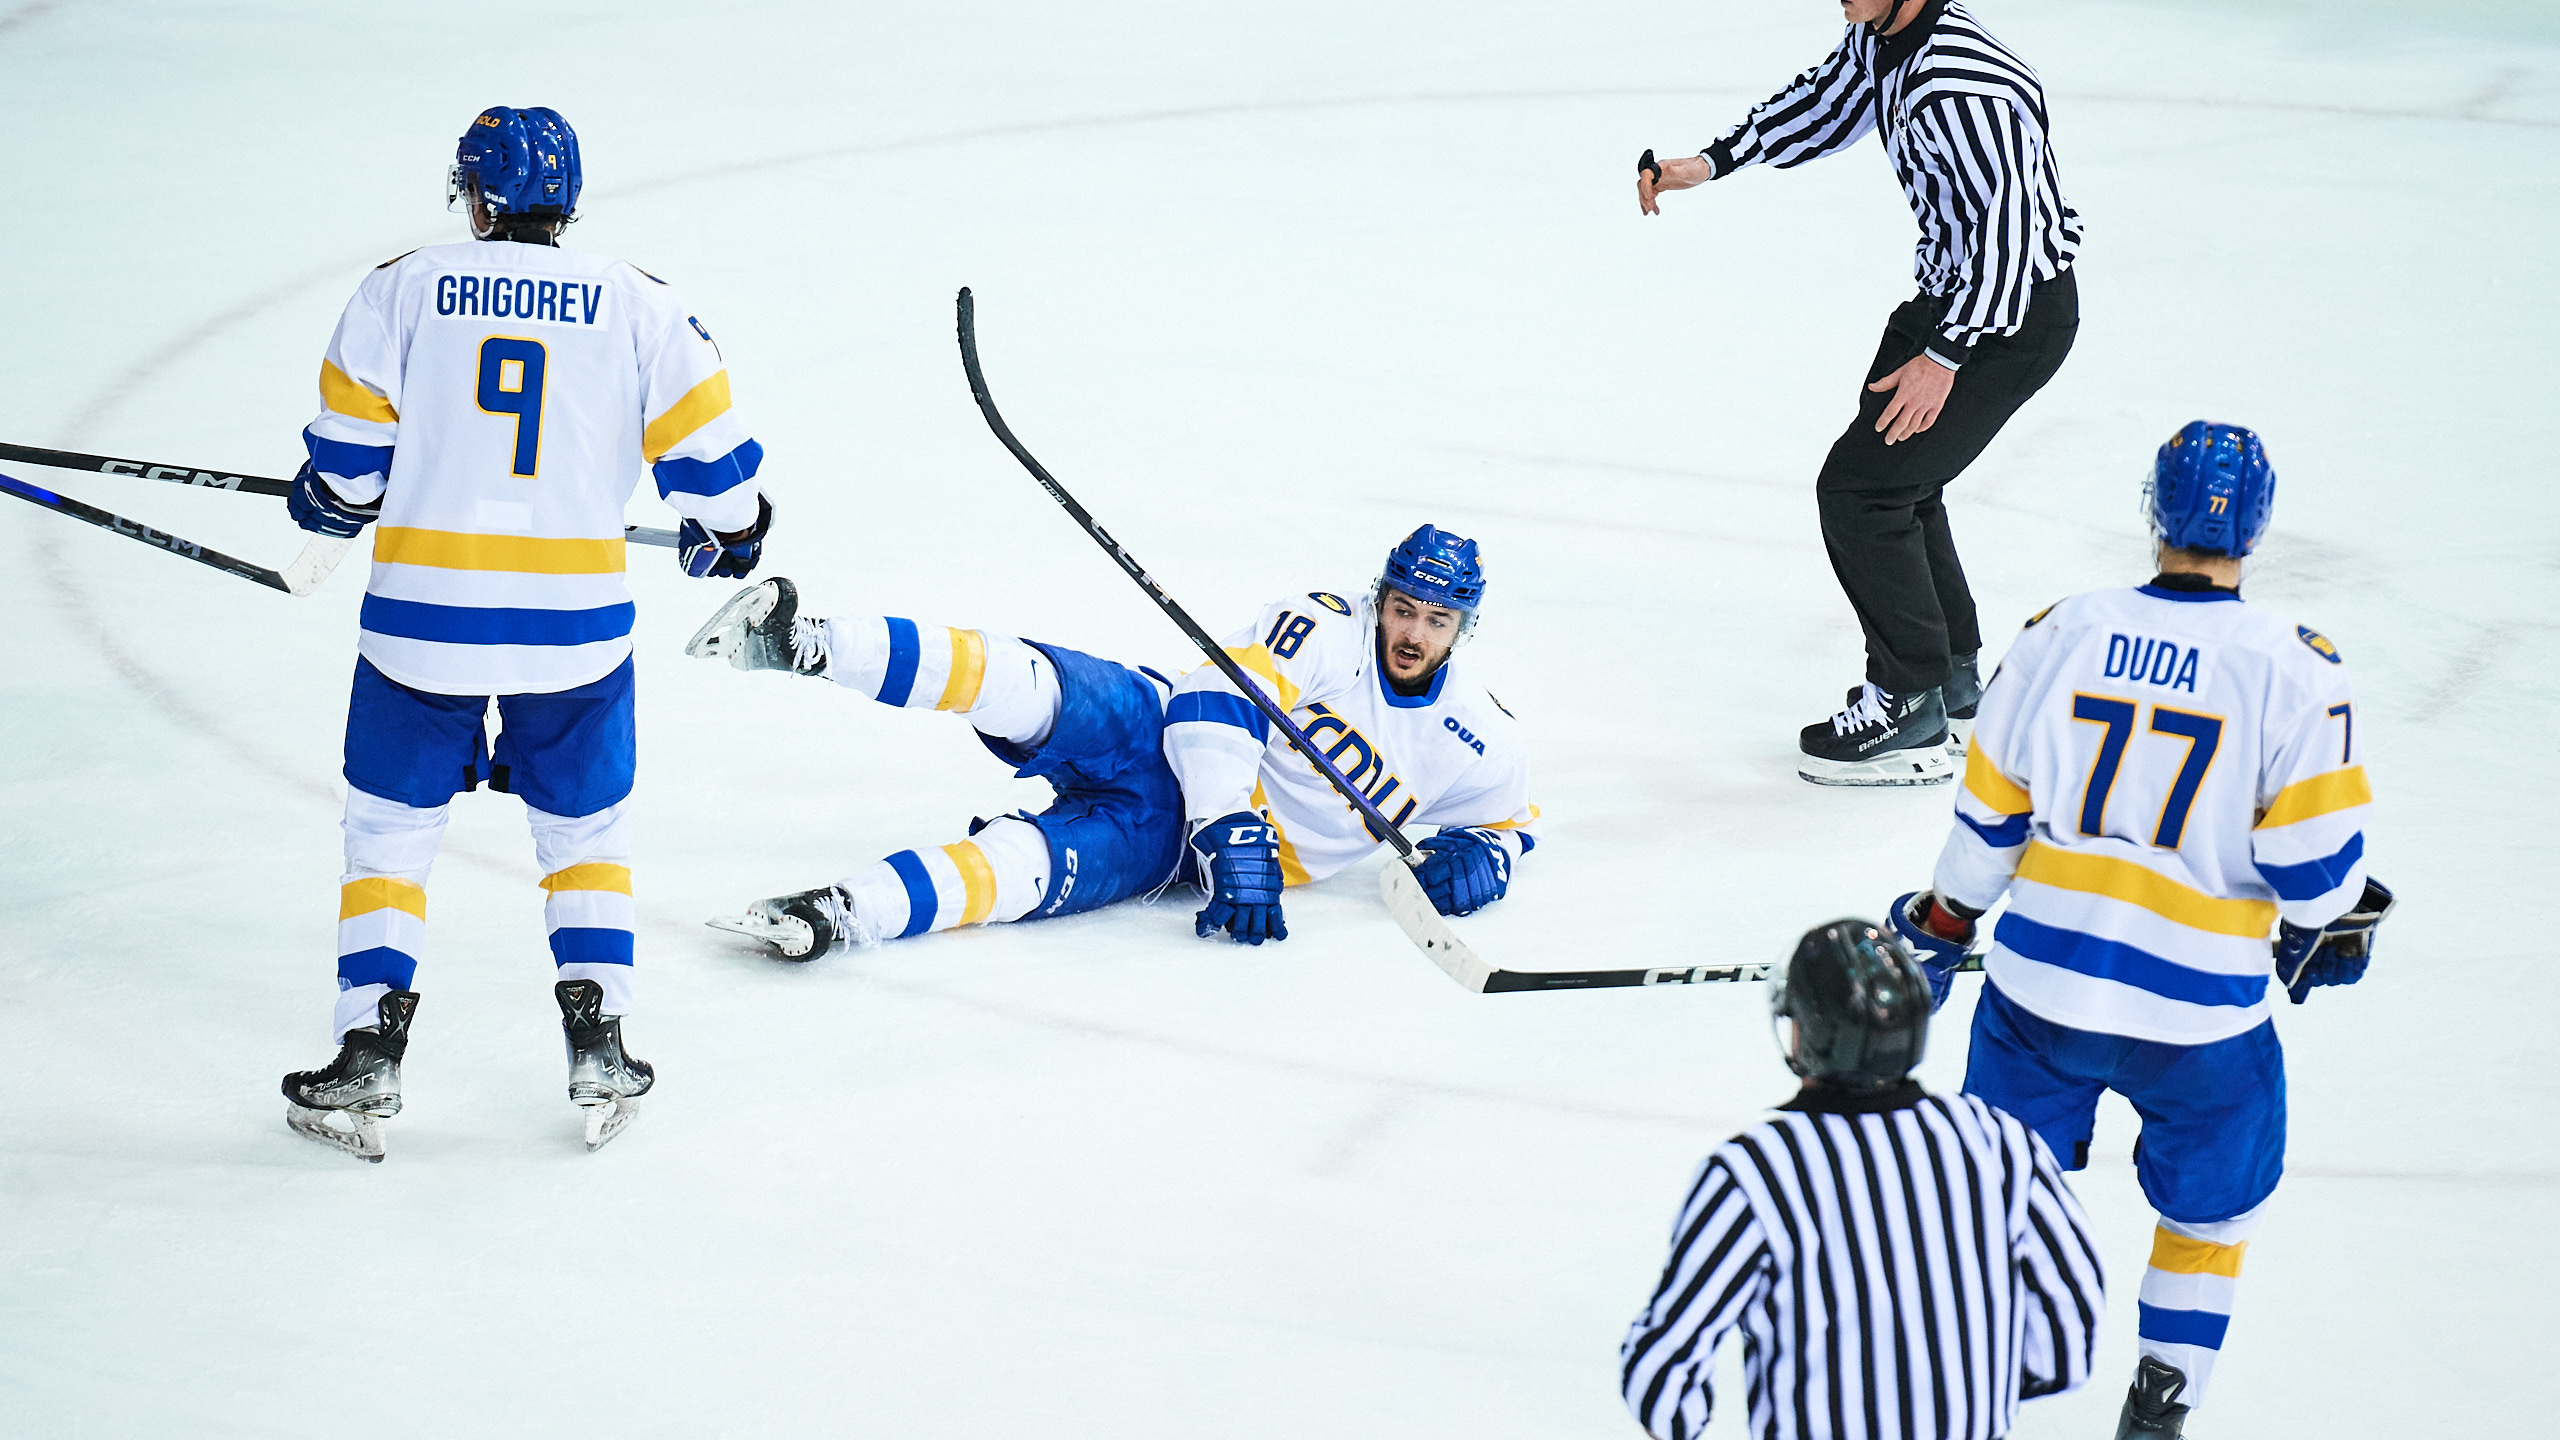 A TMU player lays on the ice after contact